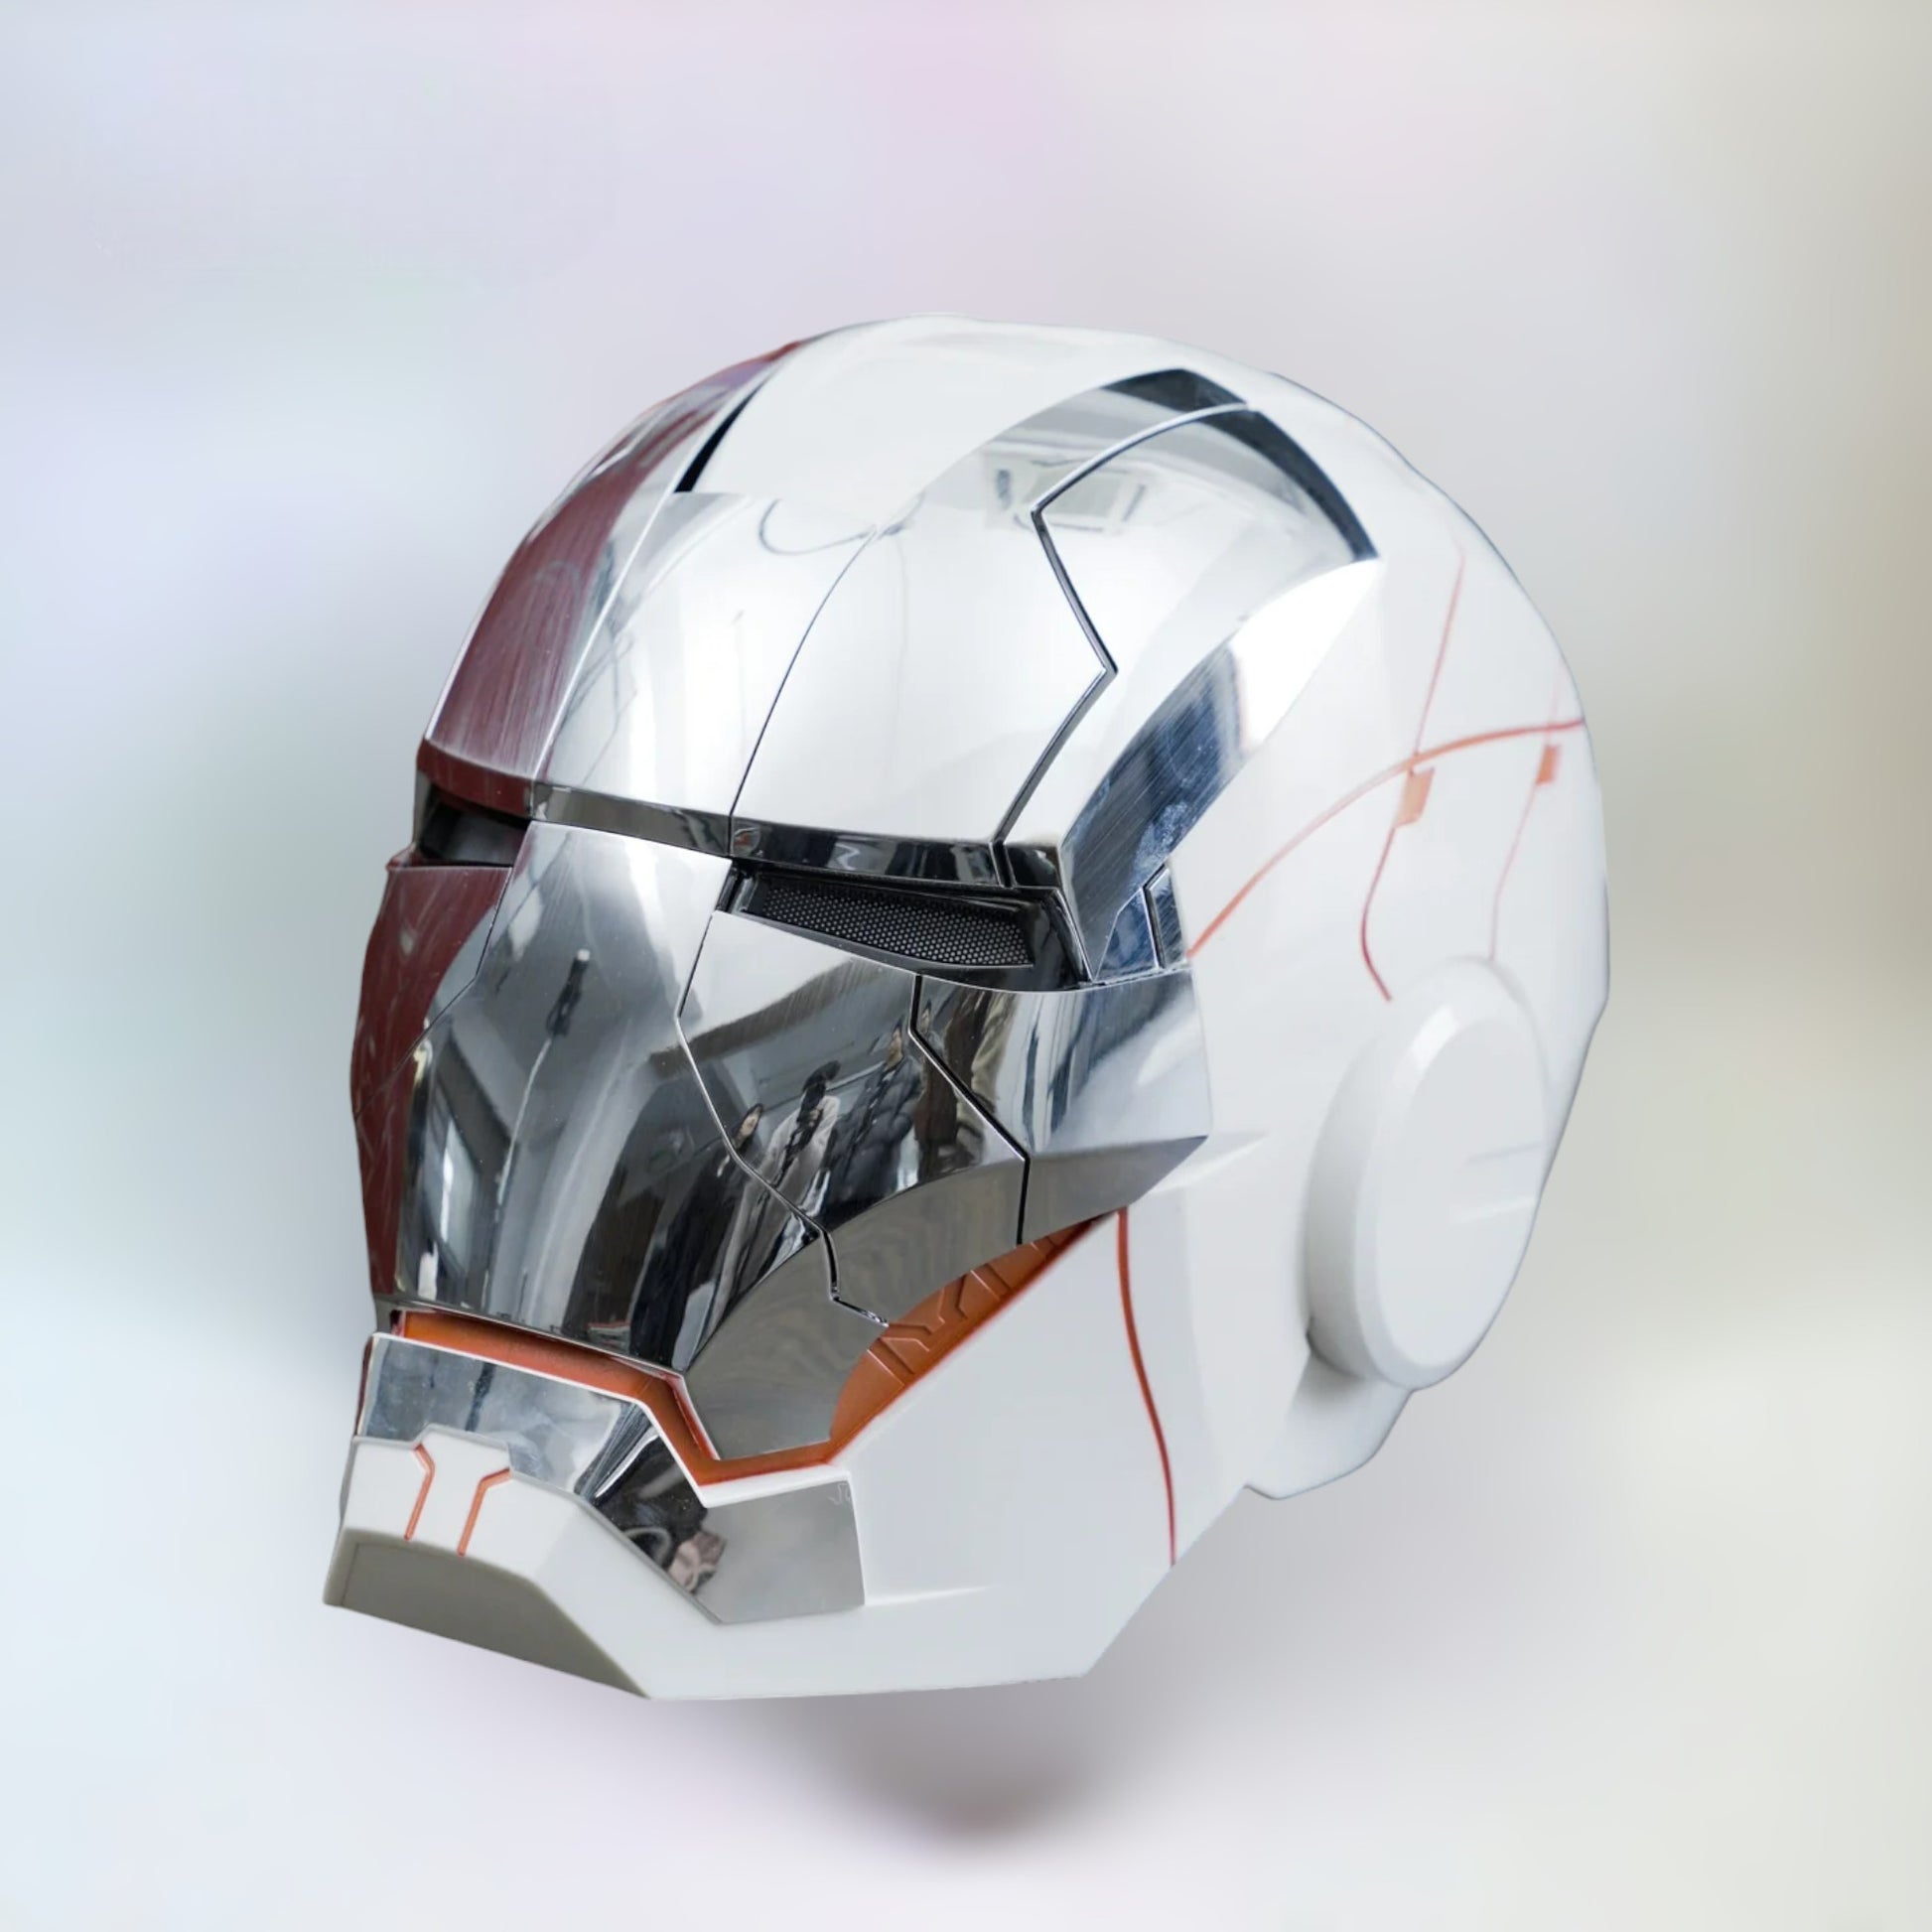 Iron Man Helmet MK5 White Edition with Jarvis Voice Control on a plain white background.